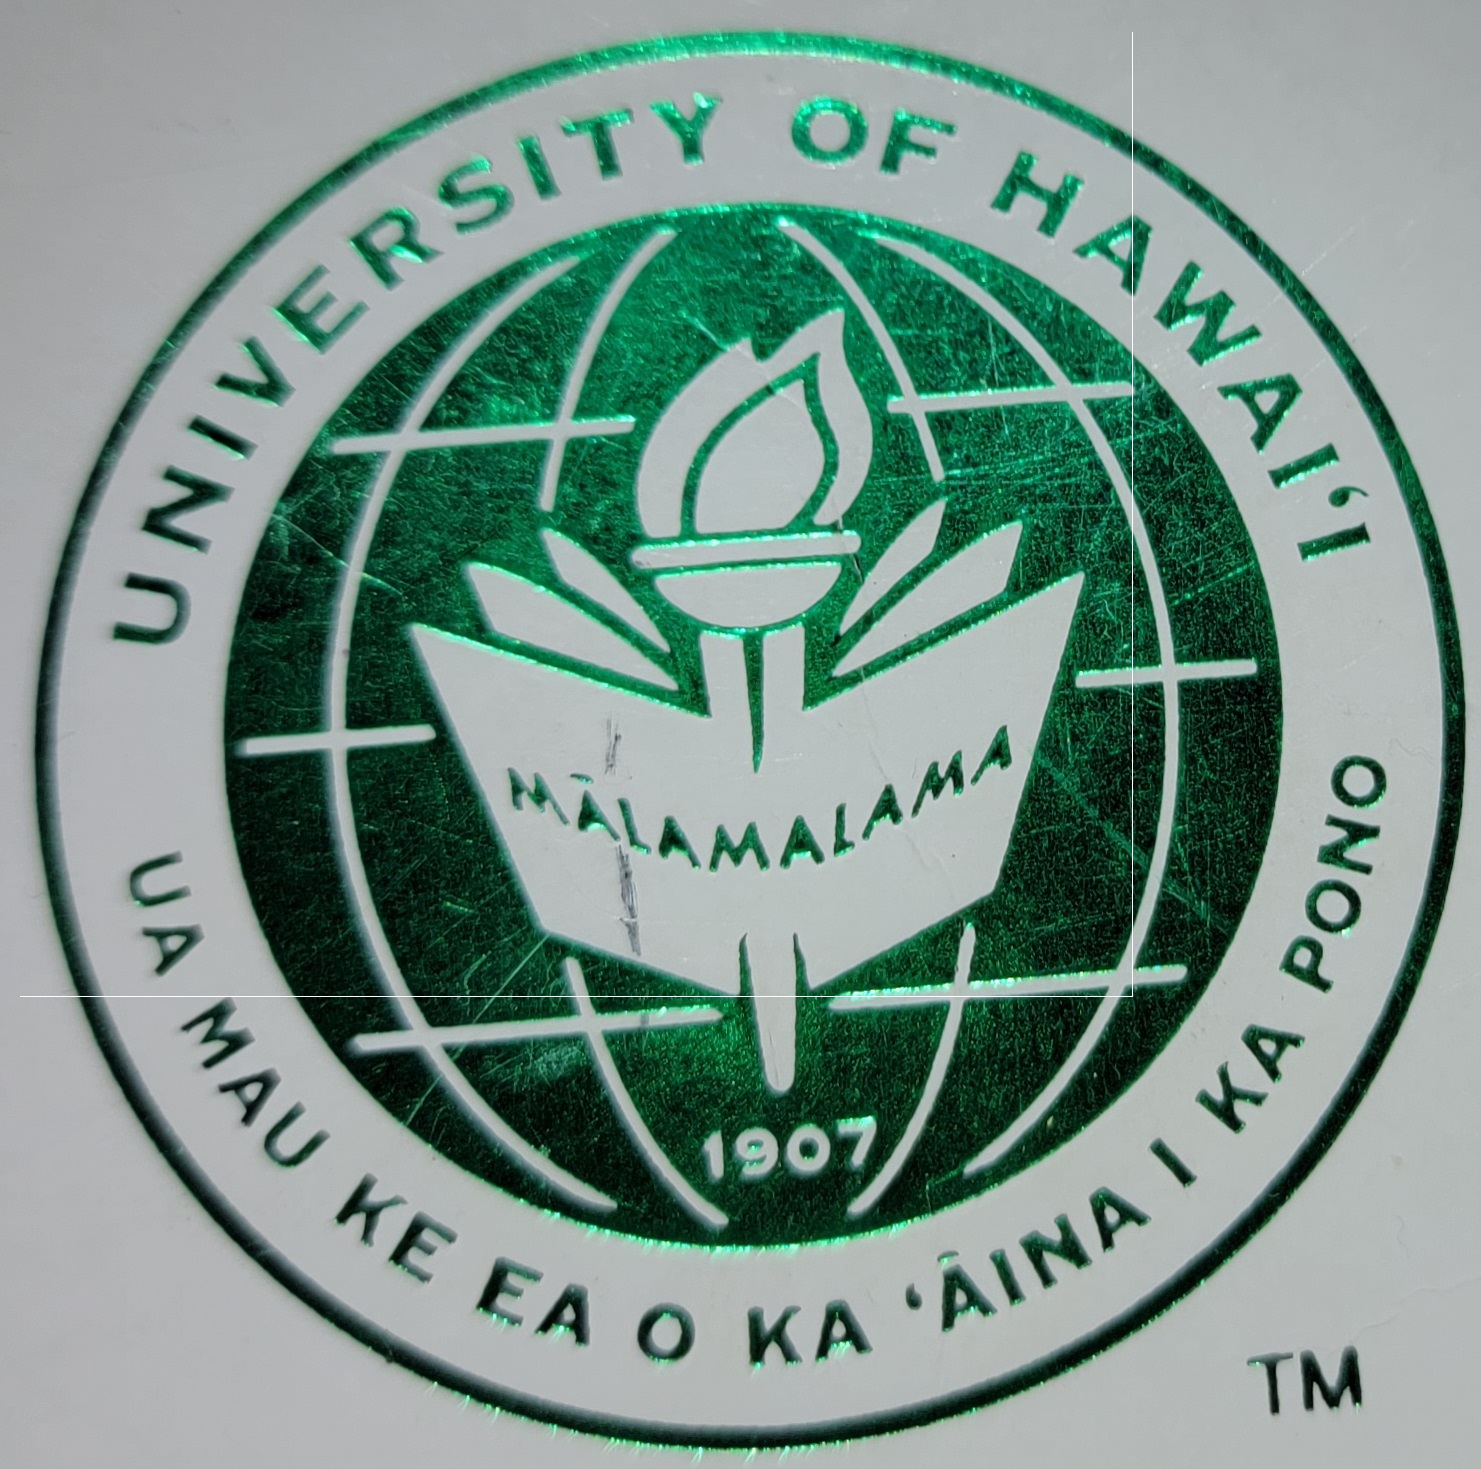 Seal of the University of Hawaii